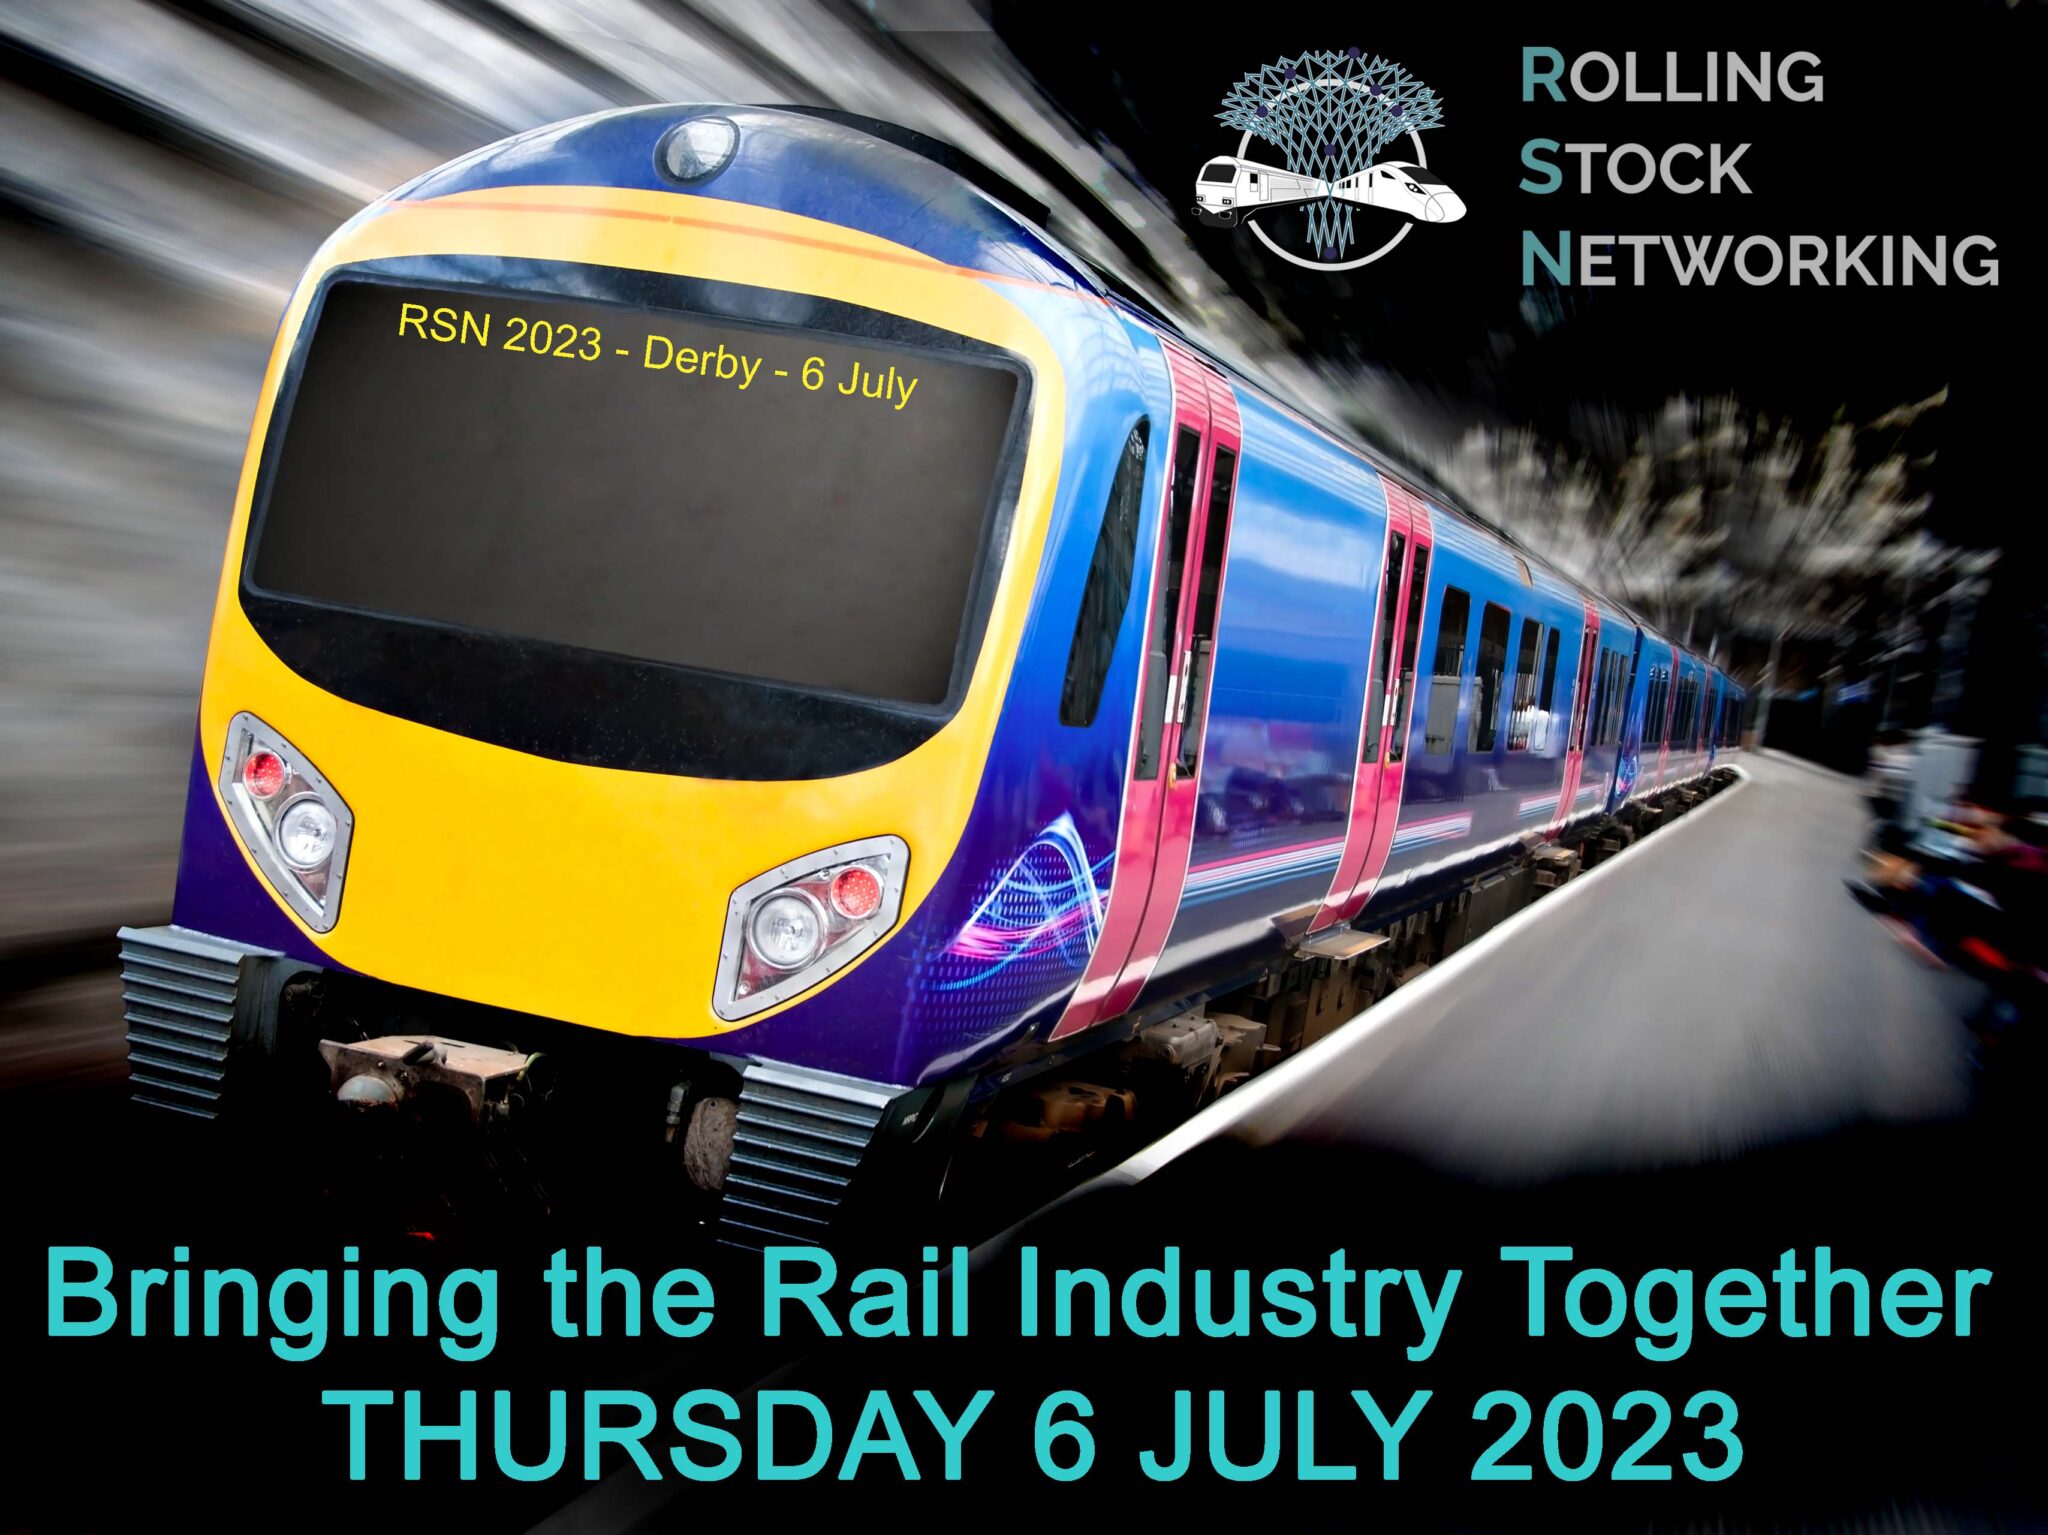 Meeting us at Rolling Stock Networking 2023 - learn more